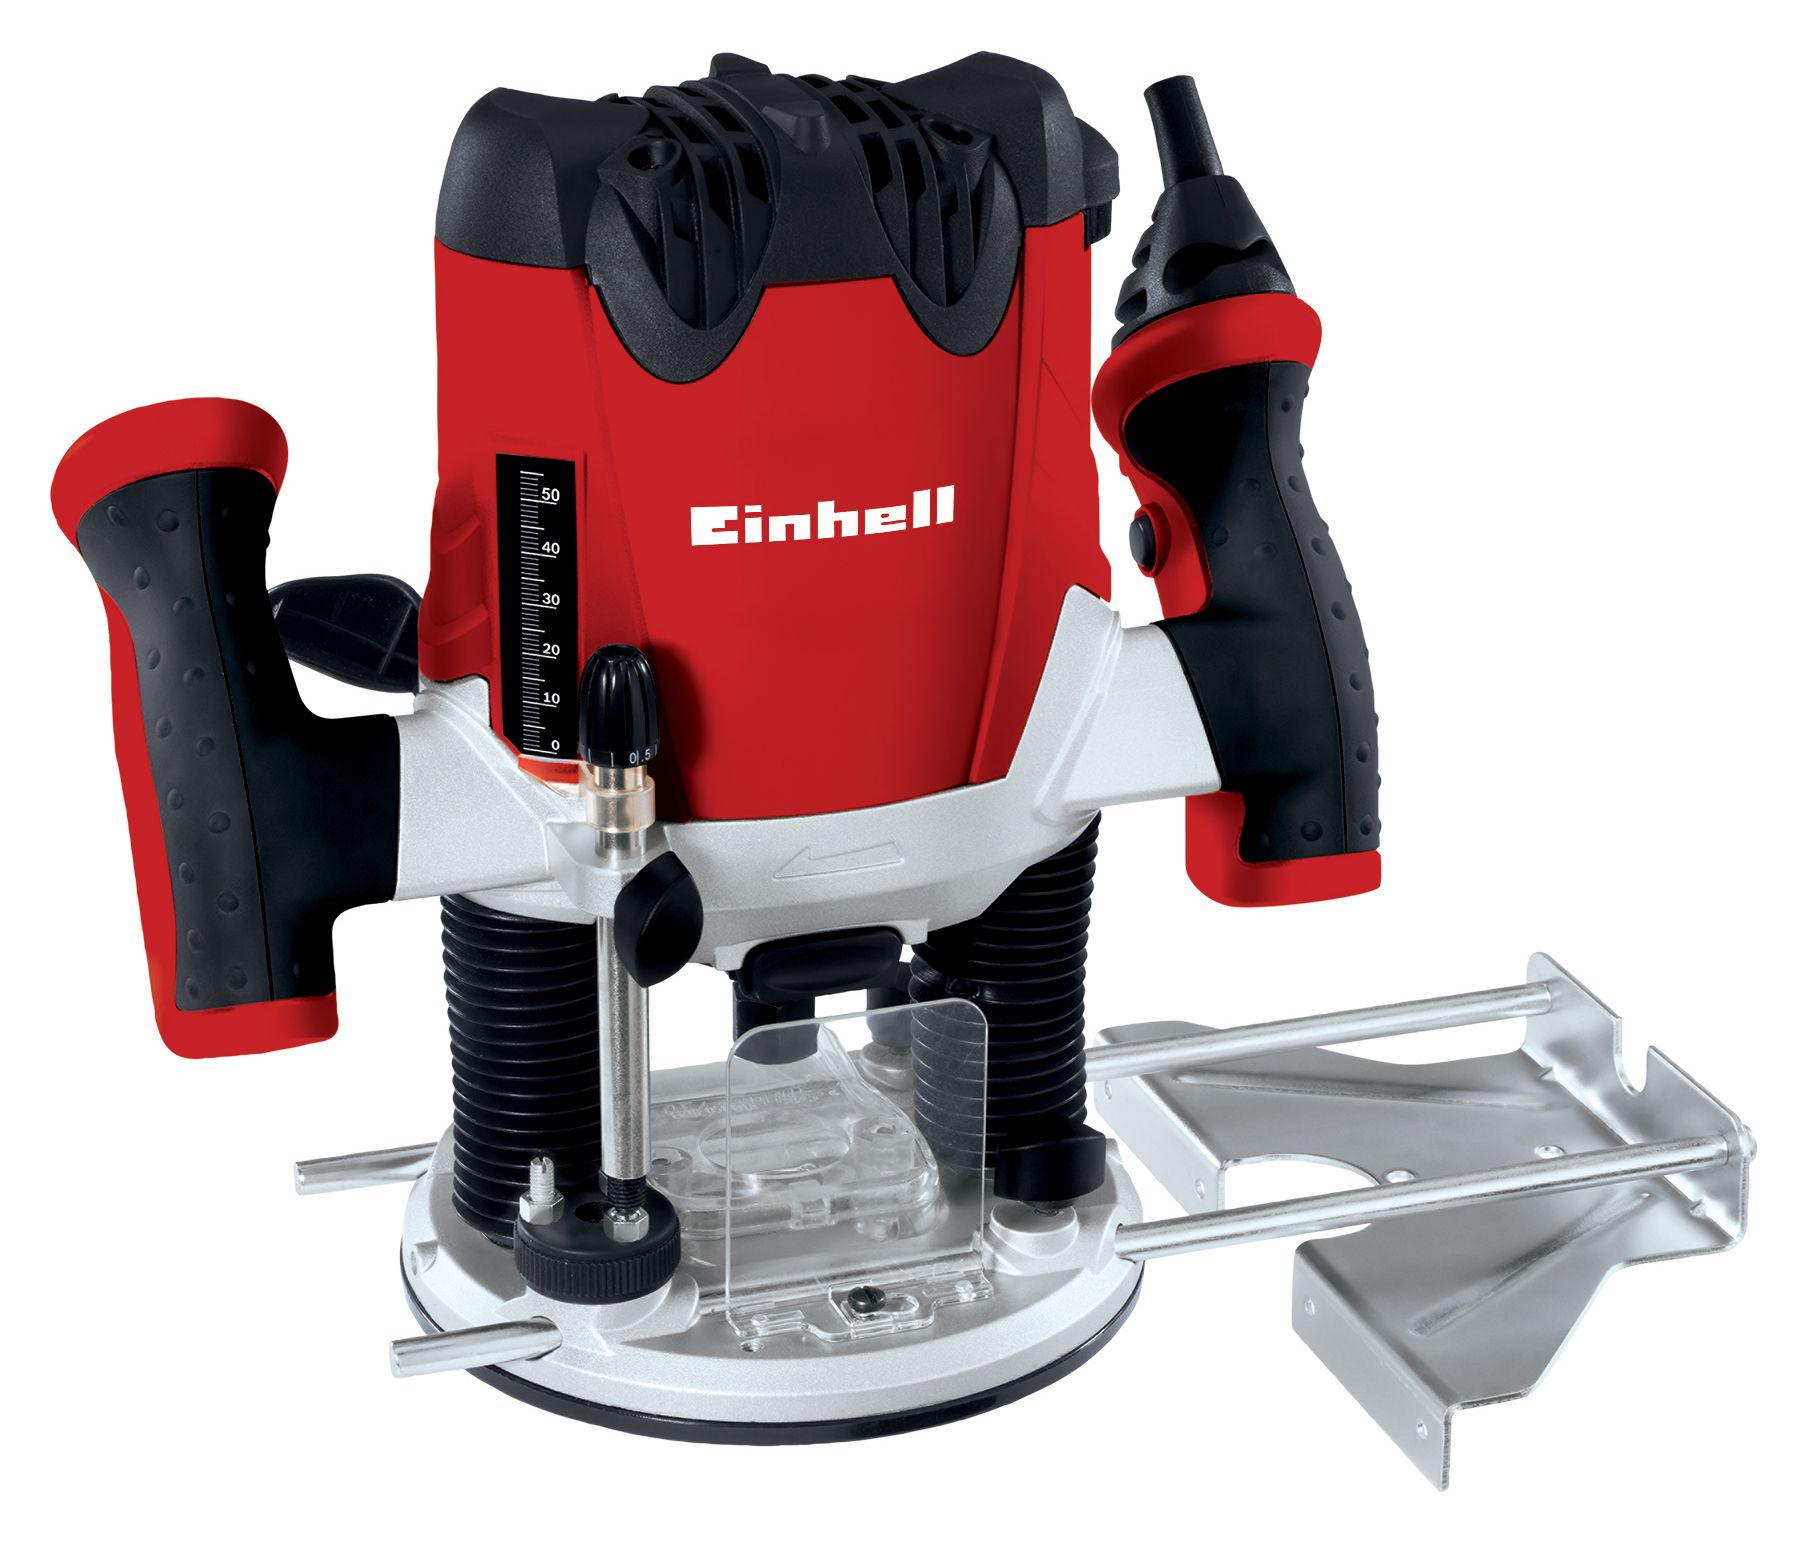 Image of Einhell Expert TE-RO 1255 E Corded Router - 1200W